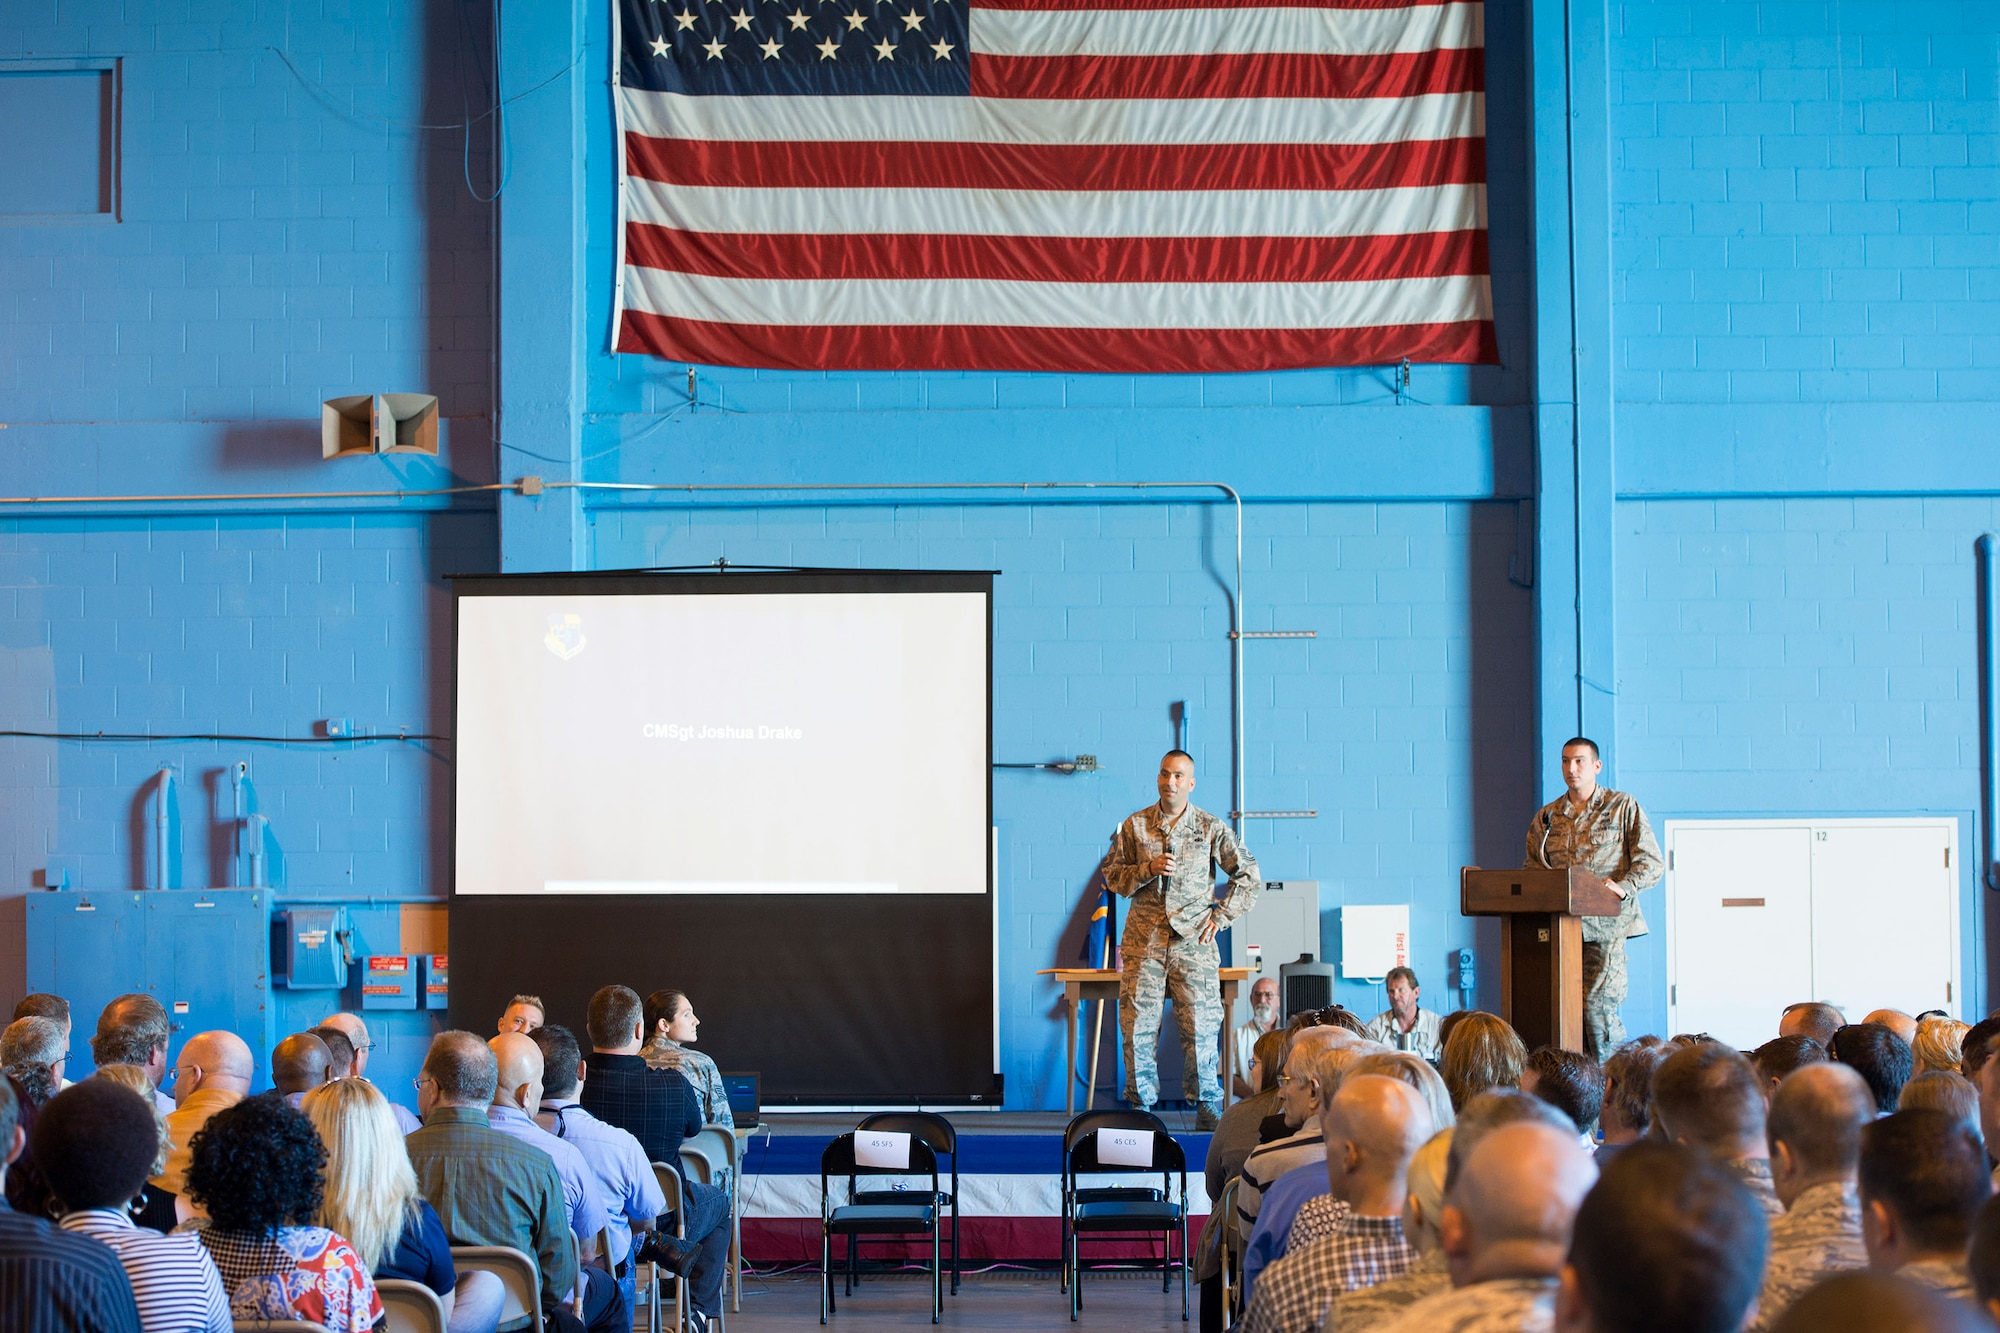 Chief Master Sgt. Joshua Drake, 45th Mission Support Group Superintendent, recognizes the hard work and dedication of his unit during their group’s Commander’s Call April 20, 2016 at Cape Canaveral Air Force Station. The group's objective was to gather together in a location where the 45th Space Wing's launch operations happen to get an up close and personal with the mission and history of the wing in an interactive, informative way. The 45th MSG's five squadrons provide total customer support for the world's busiest spaceport, assuring success of launch, range and expeditionary operations. Also, the 45th MSG Det.1 is responsible for the day-to-day operations CCAFS. (U.S. Air Force photo by Matthew Jurgens/Released) 
